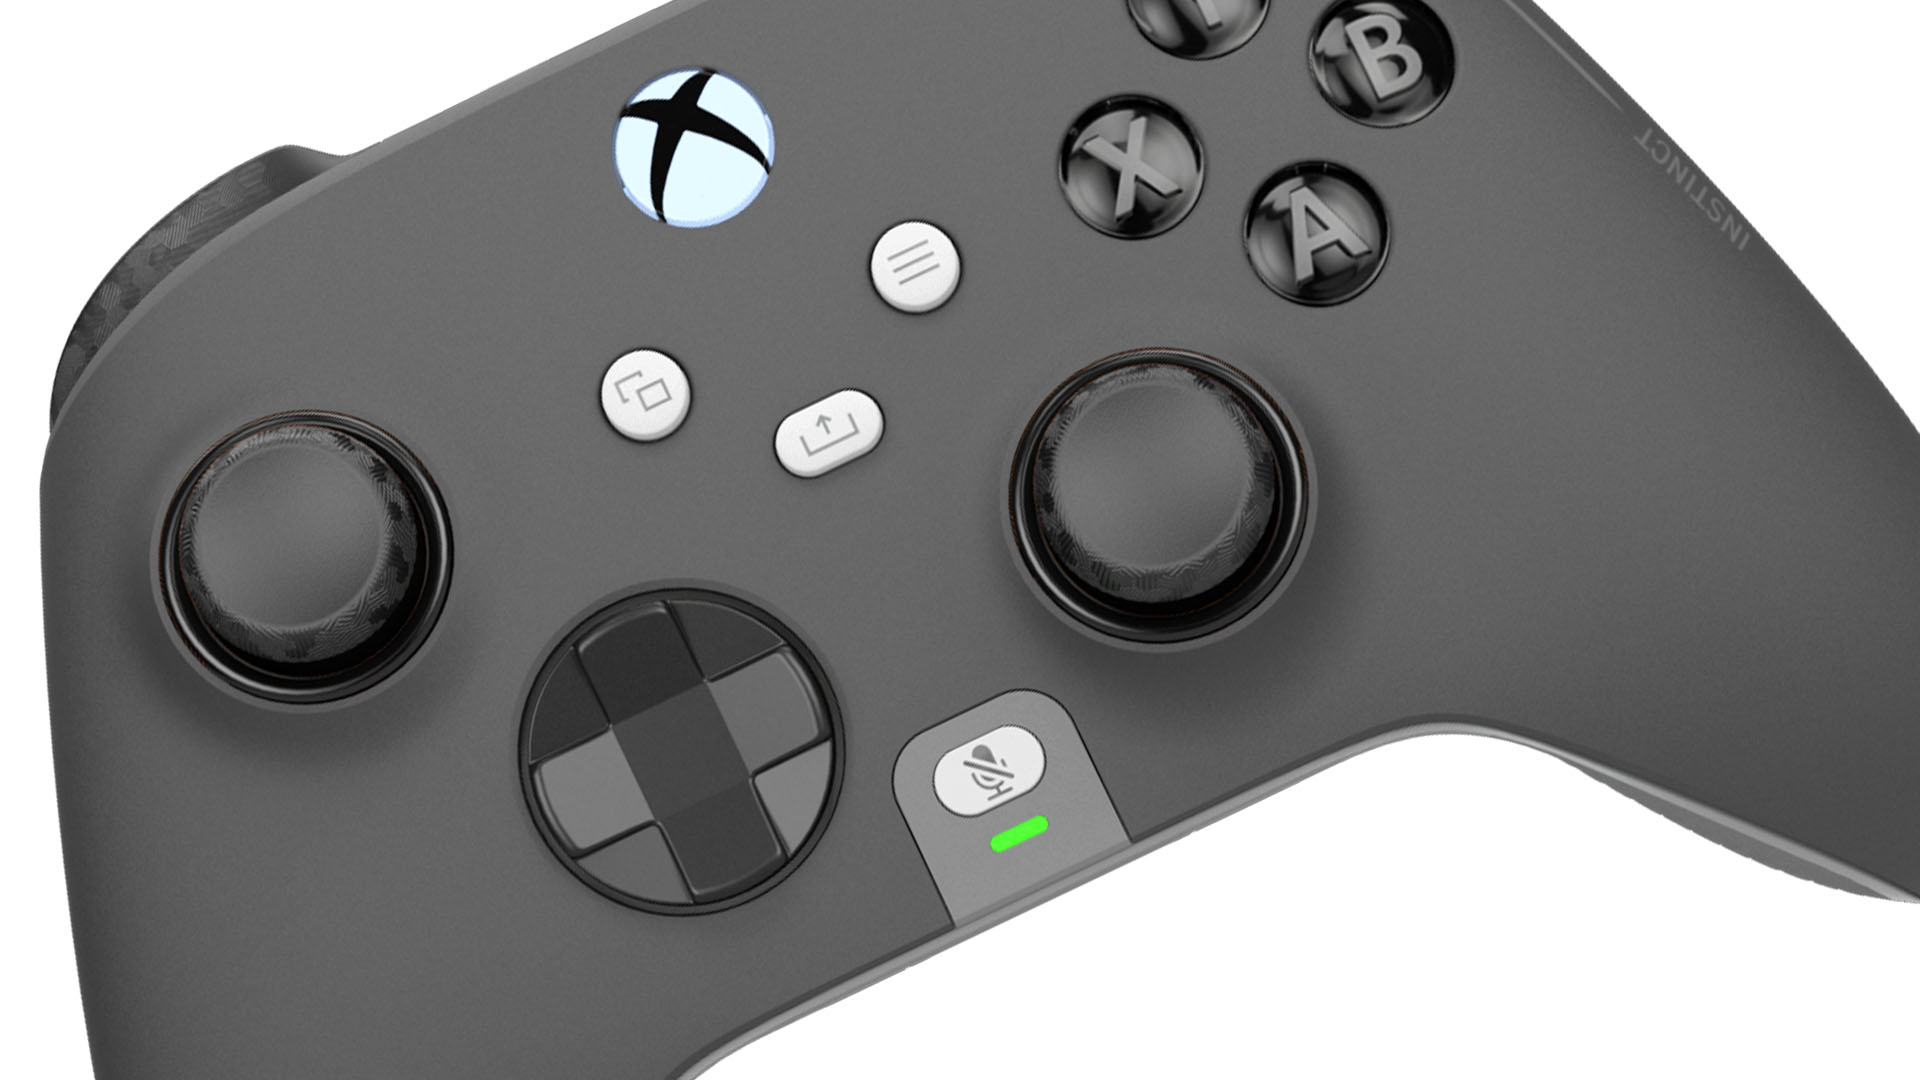 Scuf Xbox Pro Grip Kit Review-Not The Triggers You're Looking For